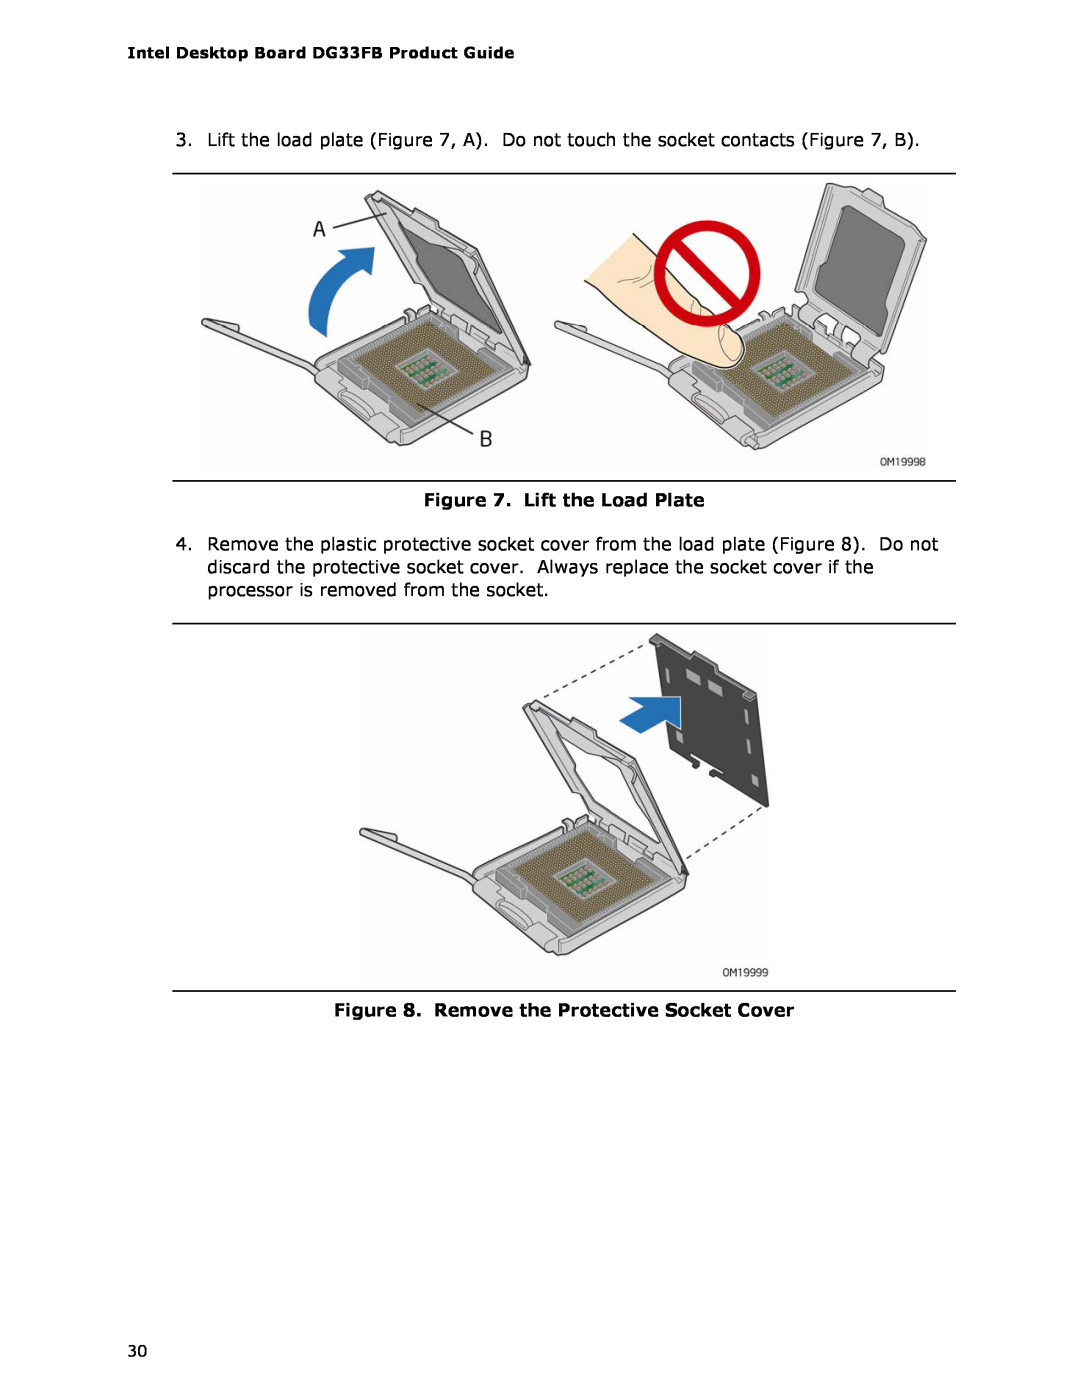 Intel DG33FB manual Lift the Load Plate, Remove the Protective Socket Cover 